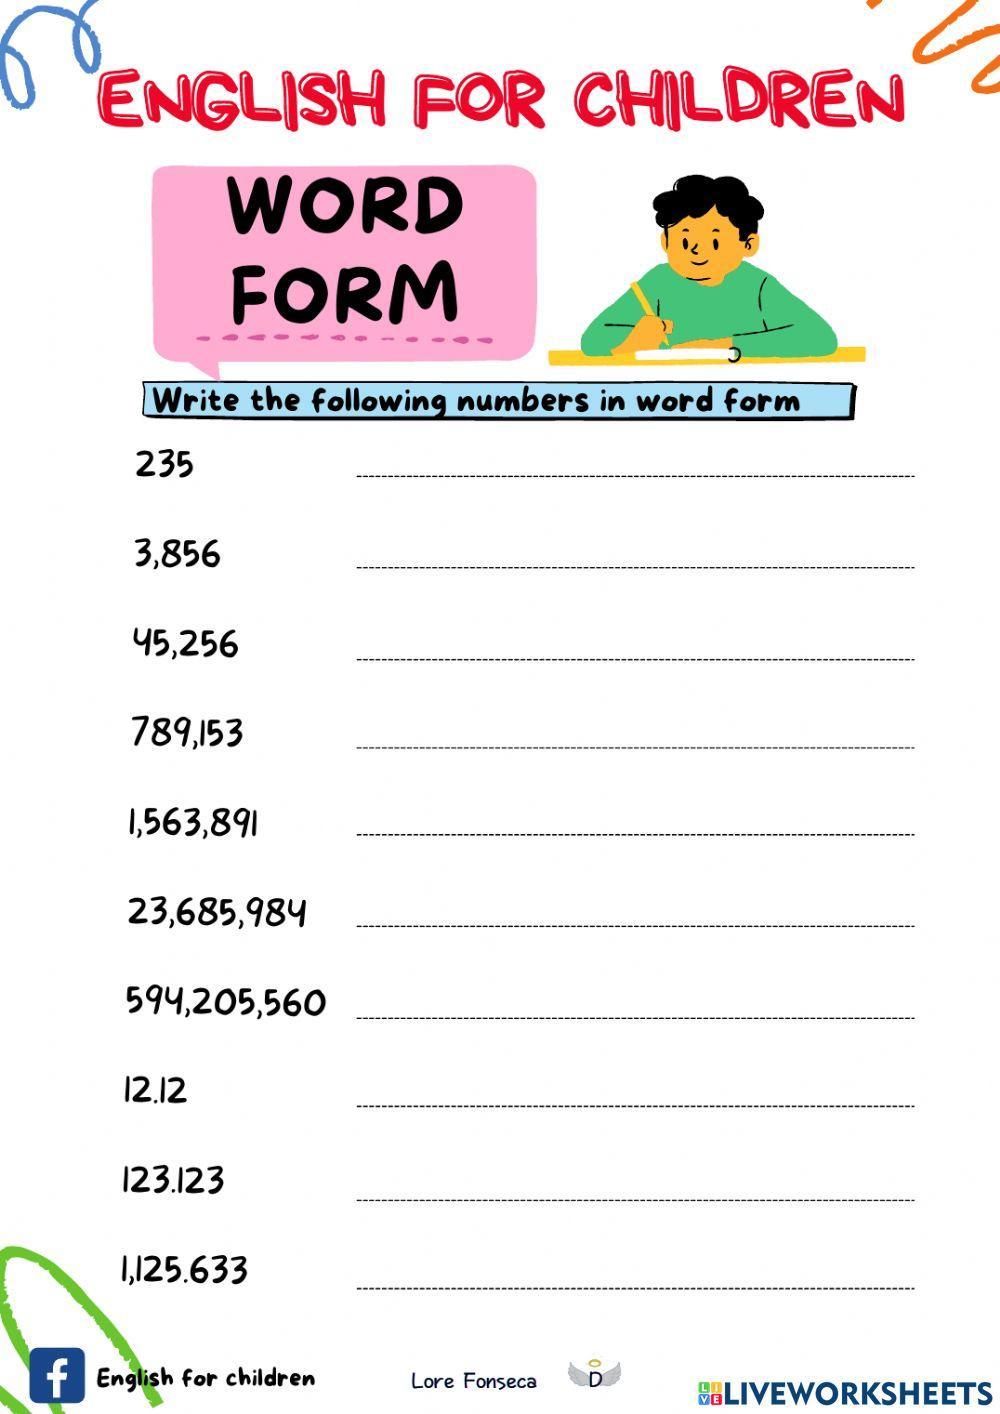 Numbers in word form